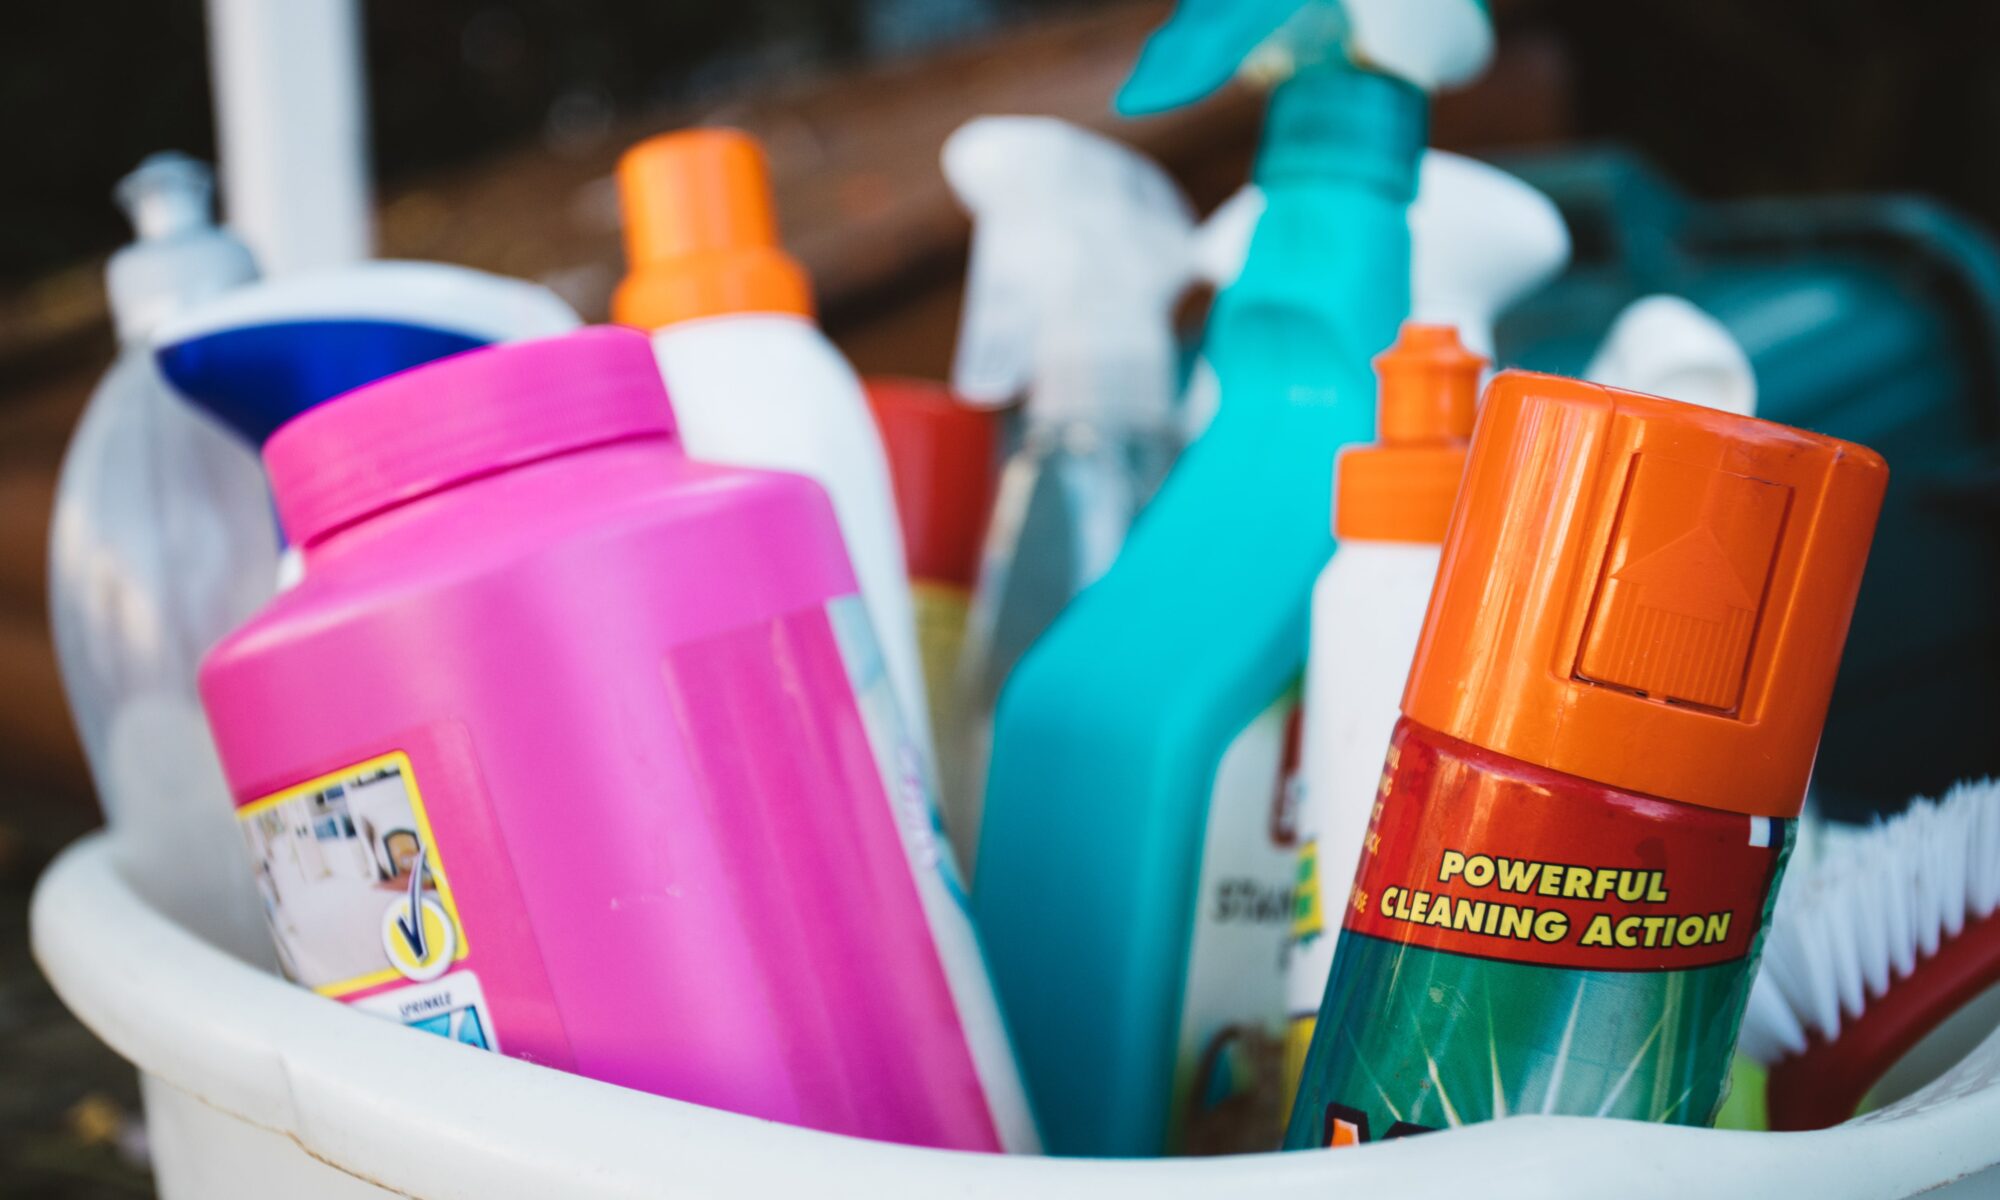 A close up of a plastic tub full of cleaning supplies